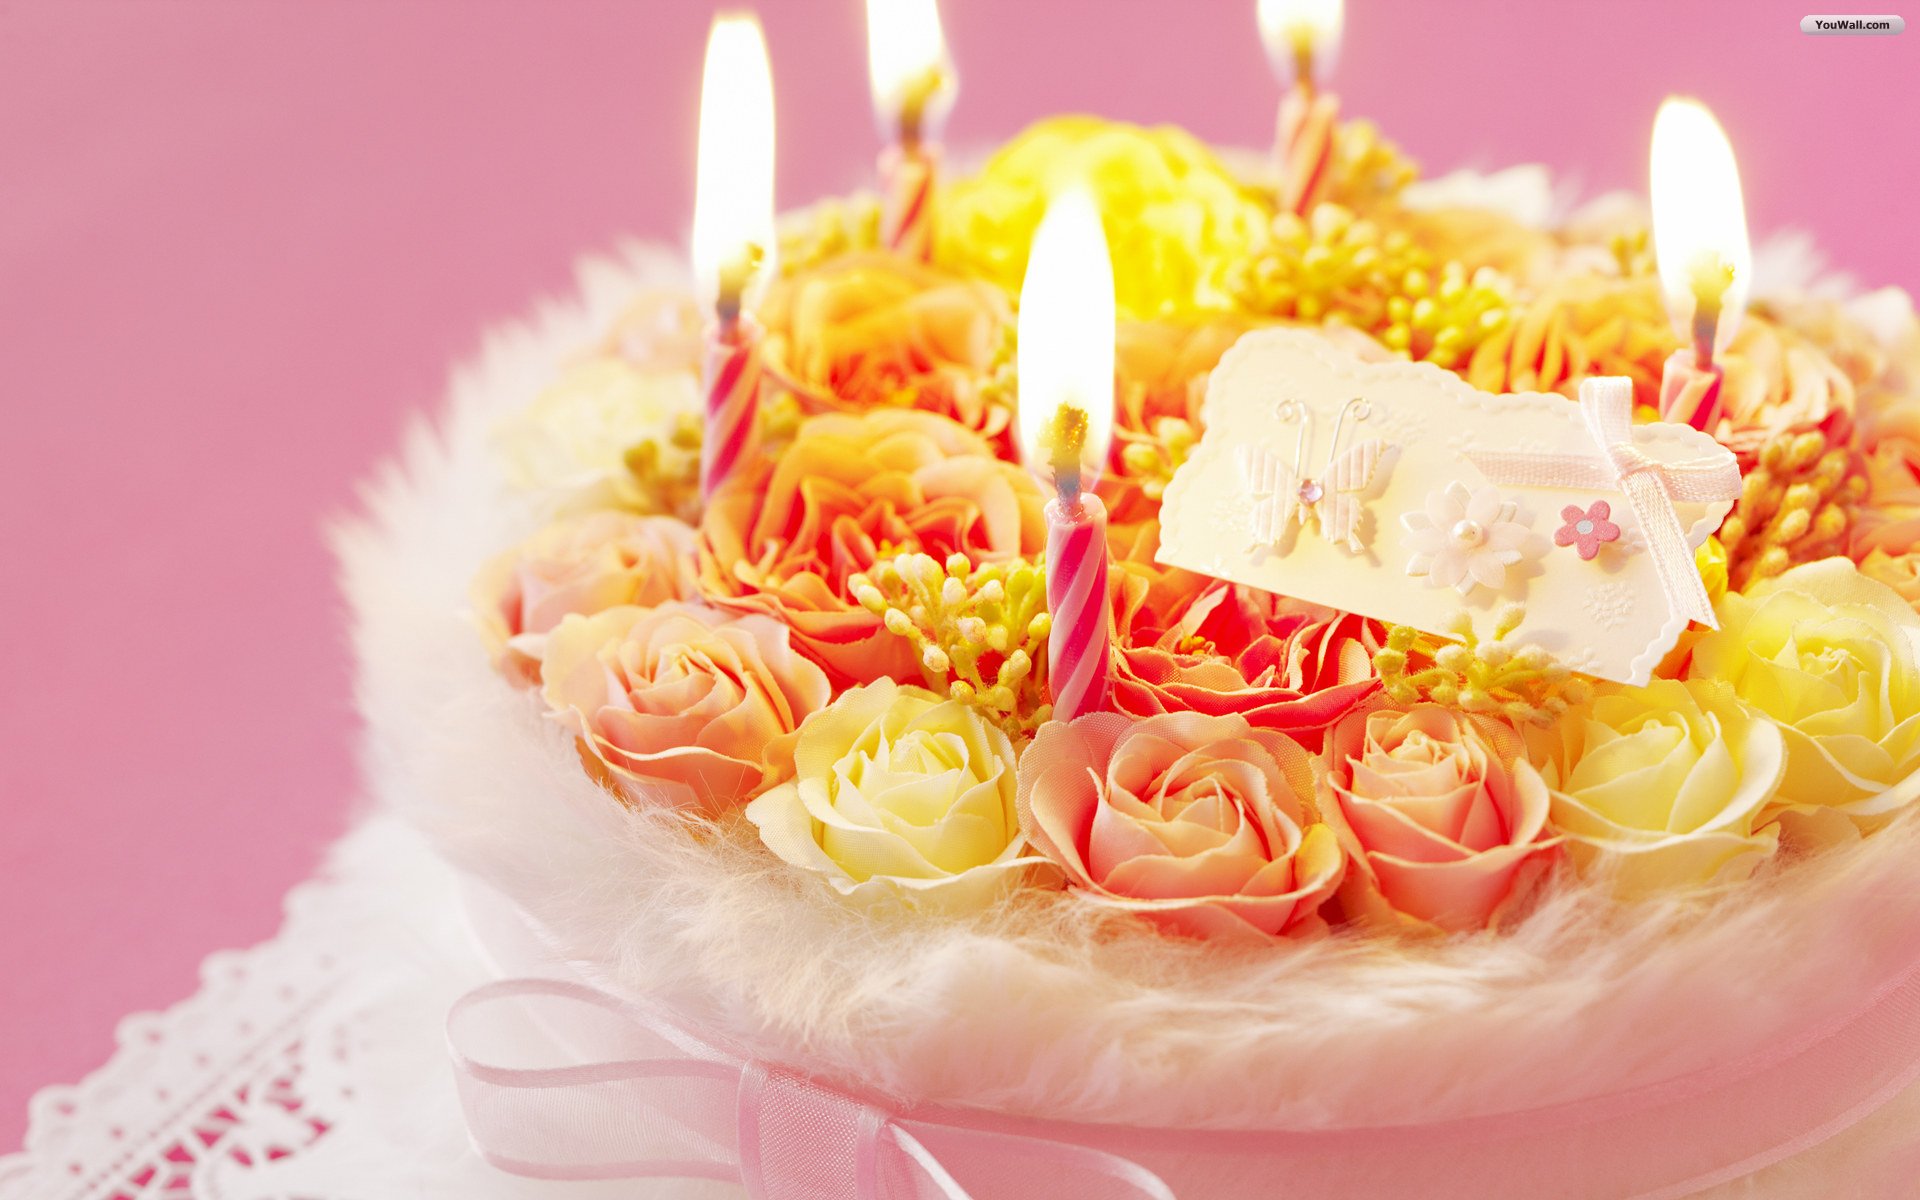 Hilarious Birthday Wishes That Can Make Your Friends Laugh on Their Birthday 3